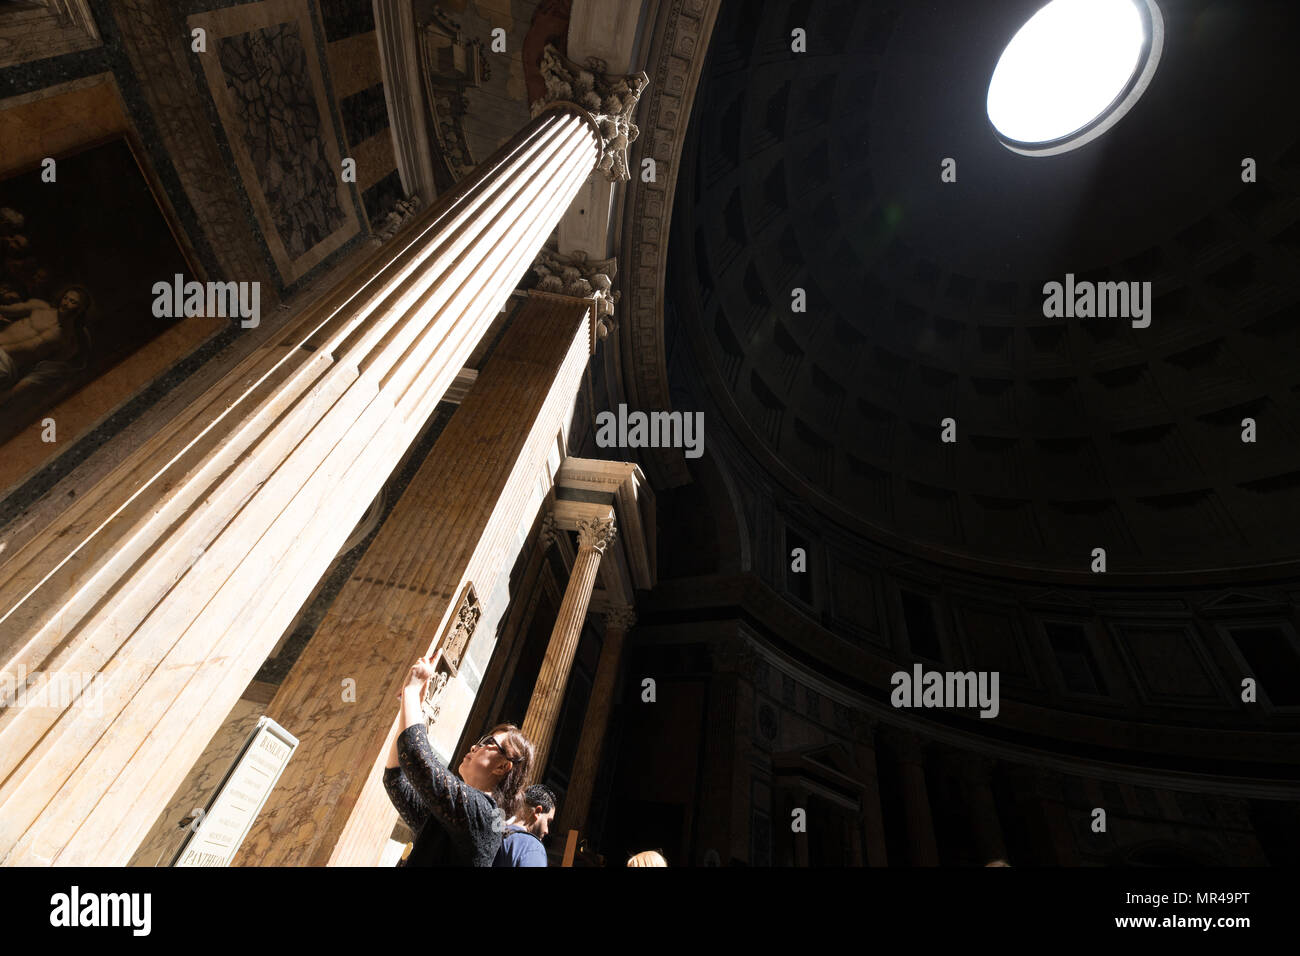 Rome Italy, Pantheon interior scene, tourist visiting the capital city monuments Stock Photo